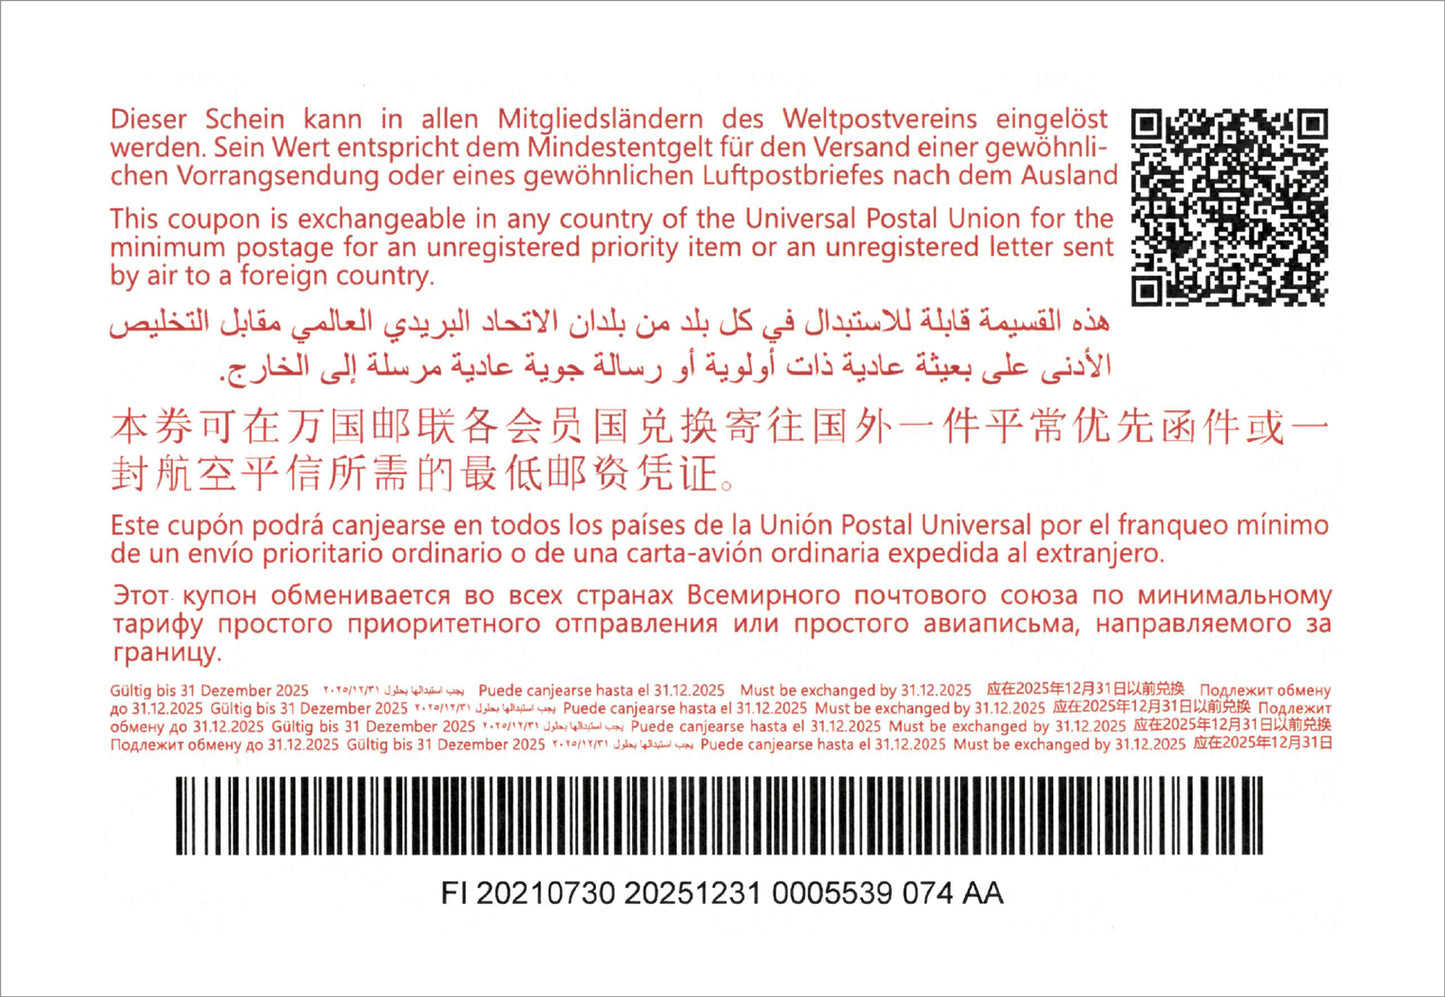 International reply coupon, Finland